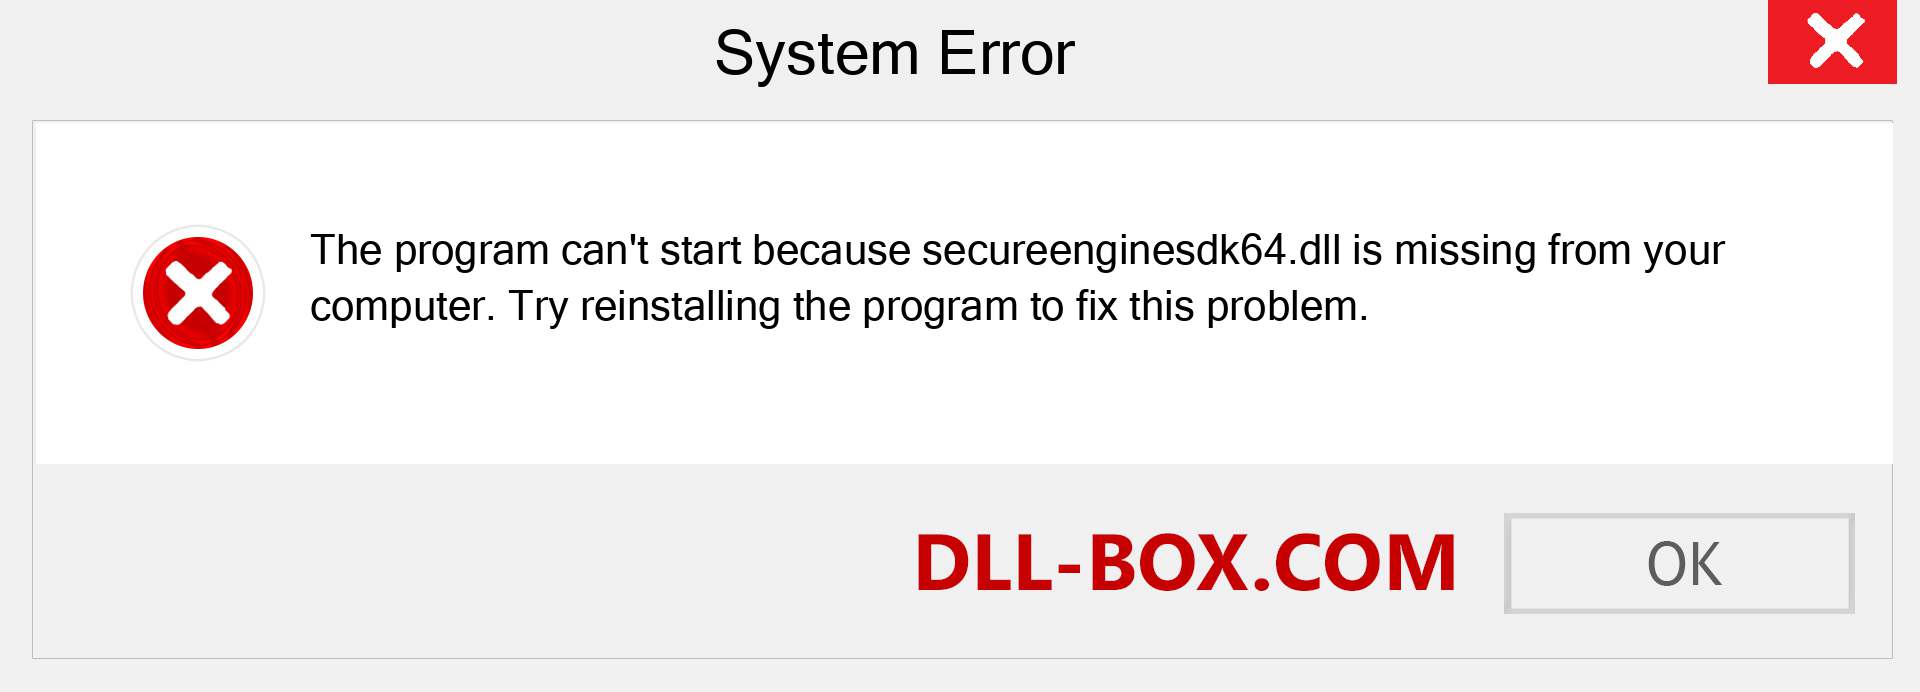  secureenginesdk64.dll file is missing?. Download for Windows 7, 8, 10 - Fix  secureenginesdk64 dll Missing Error on Windows, photos, images